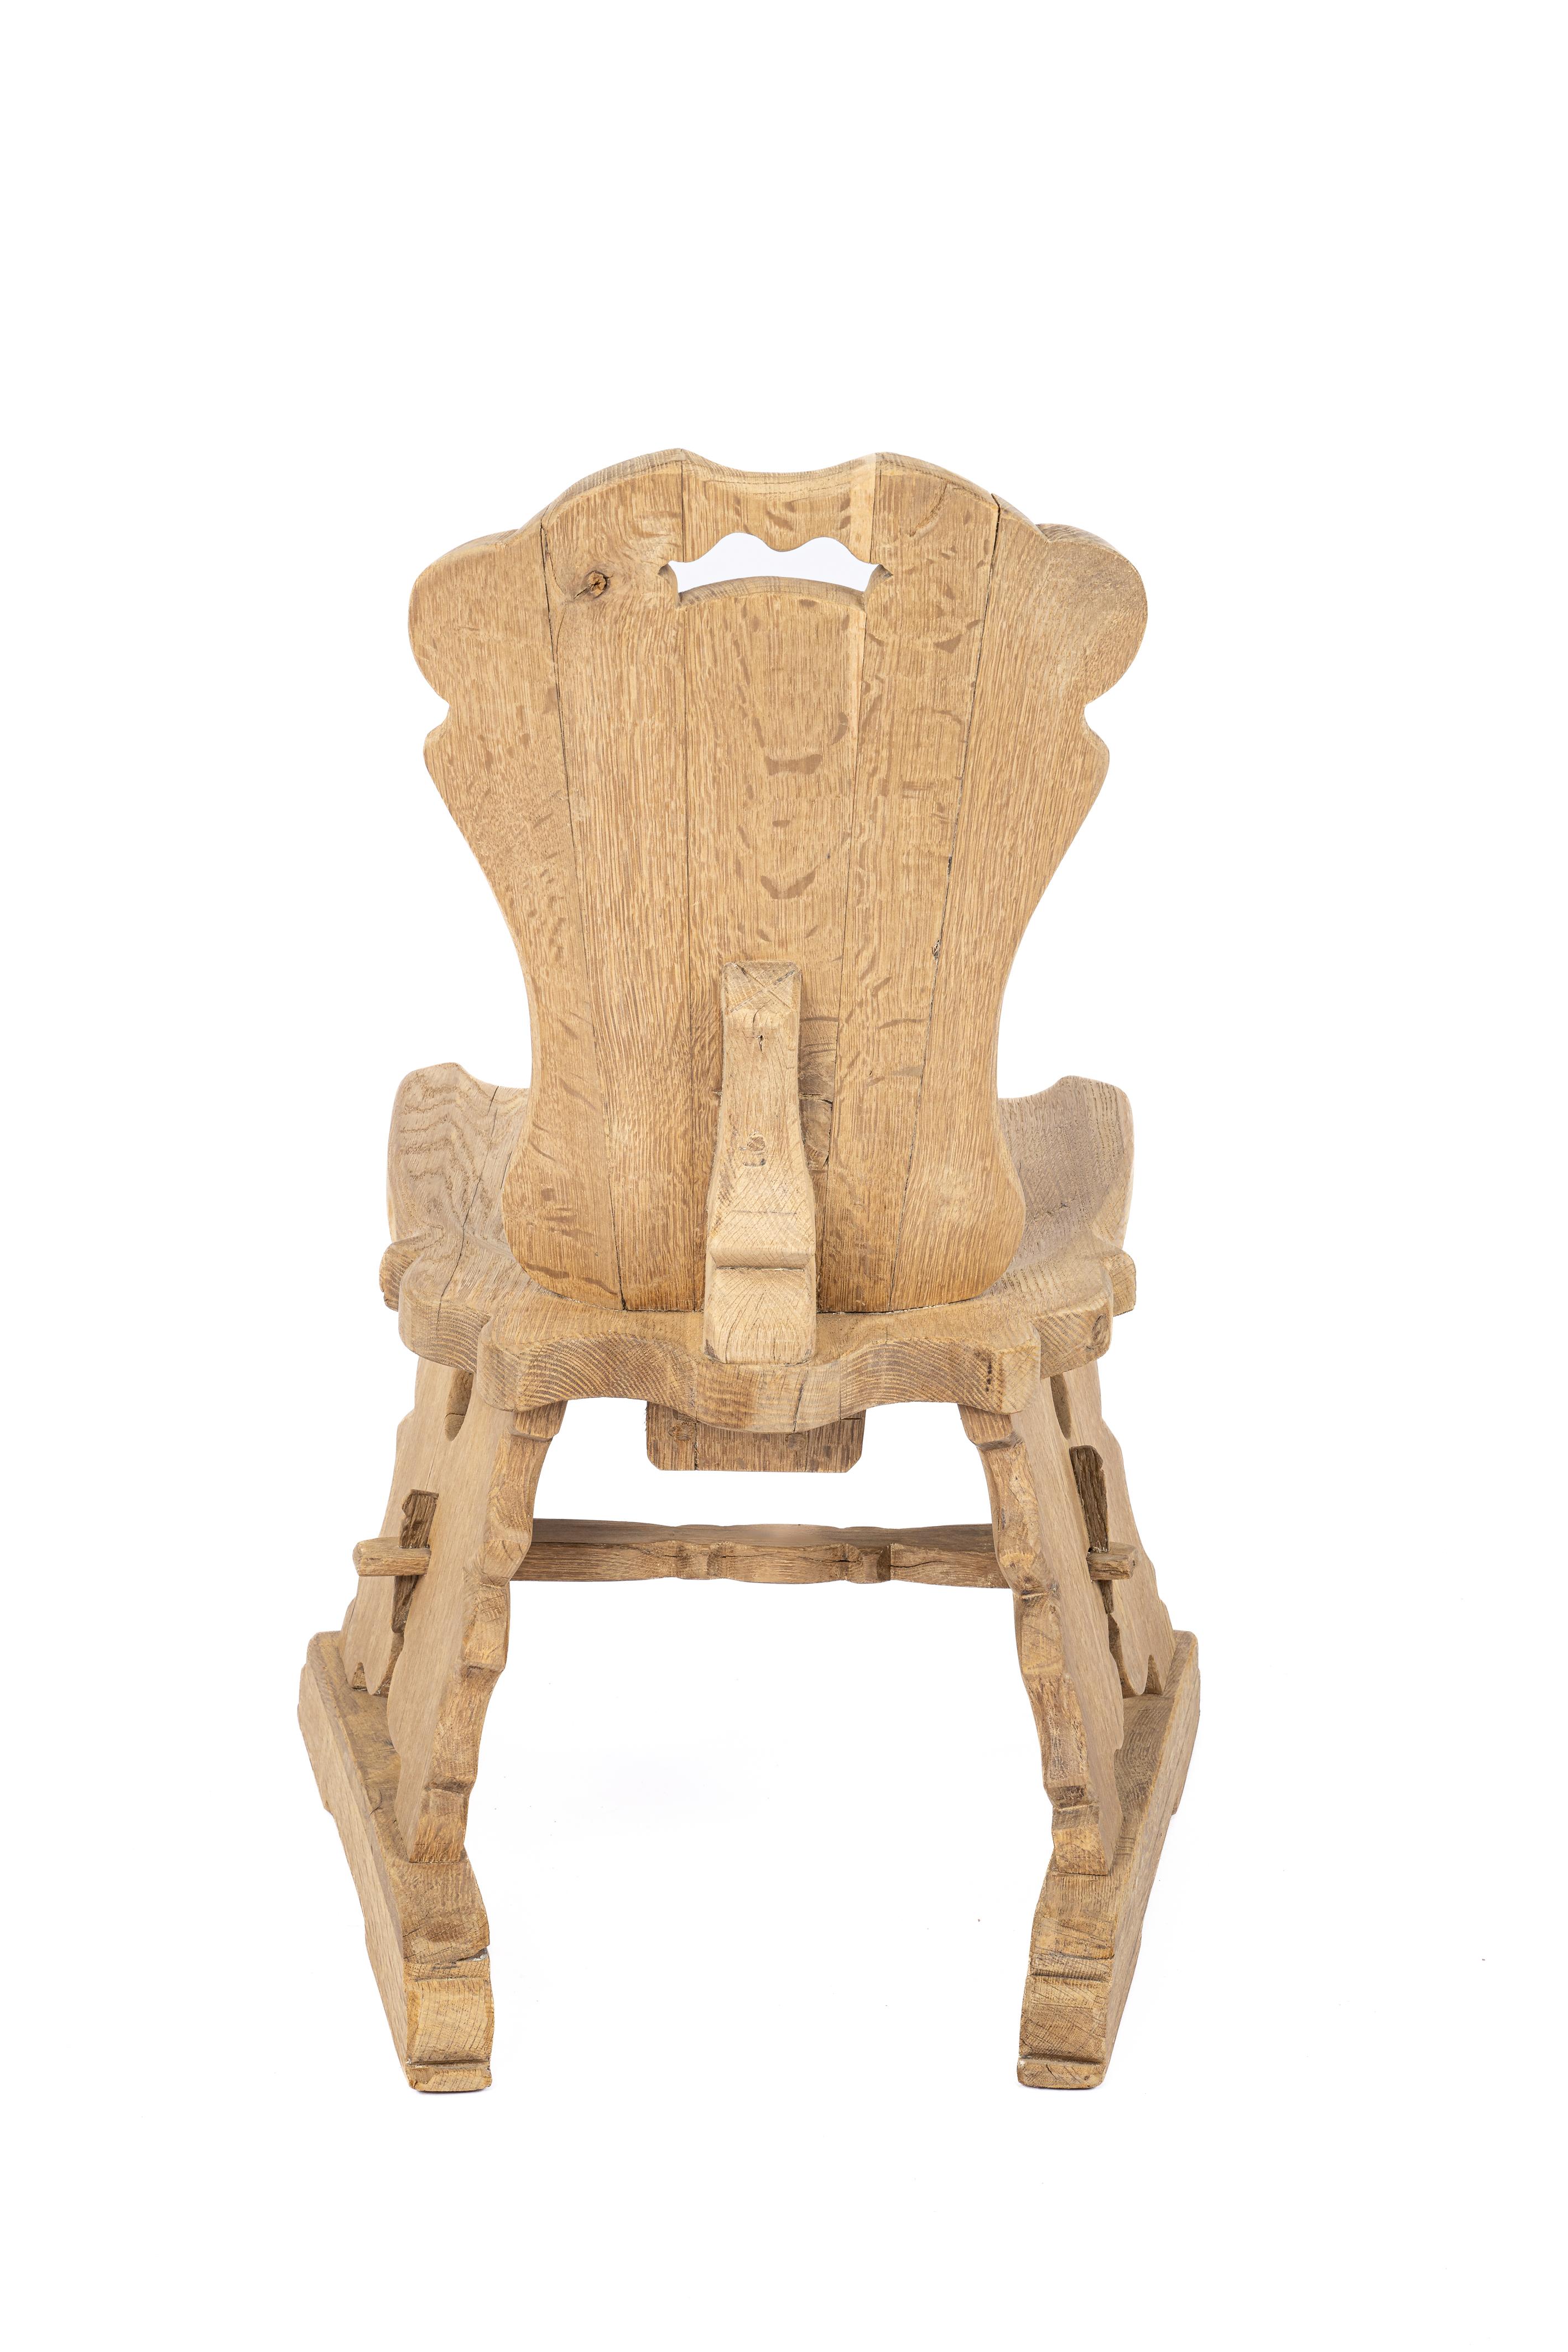 Dutch Solid European Oak sculpted chair made by Piet Rombouts circa 1950 Netherlands For Sale